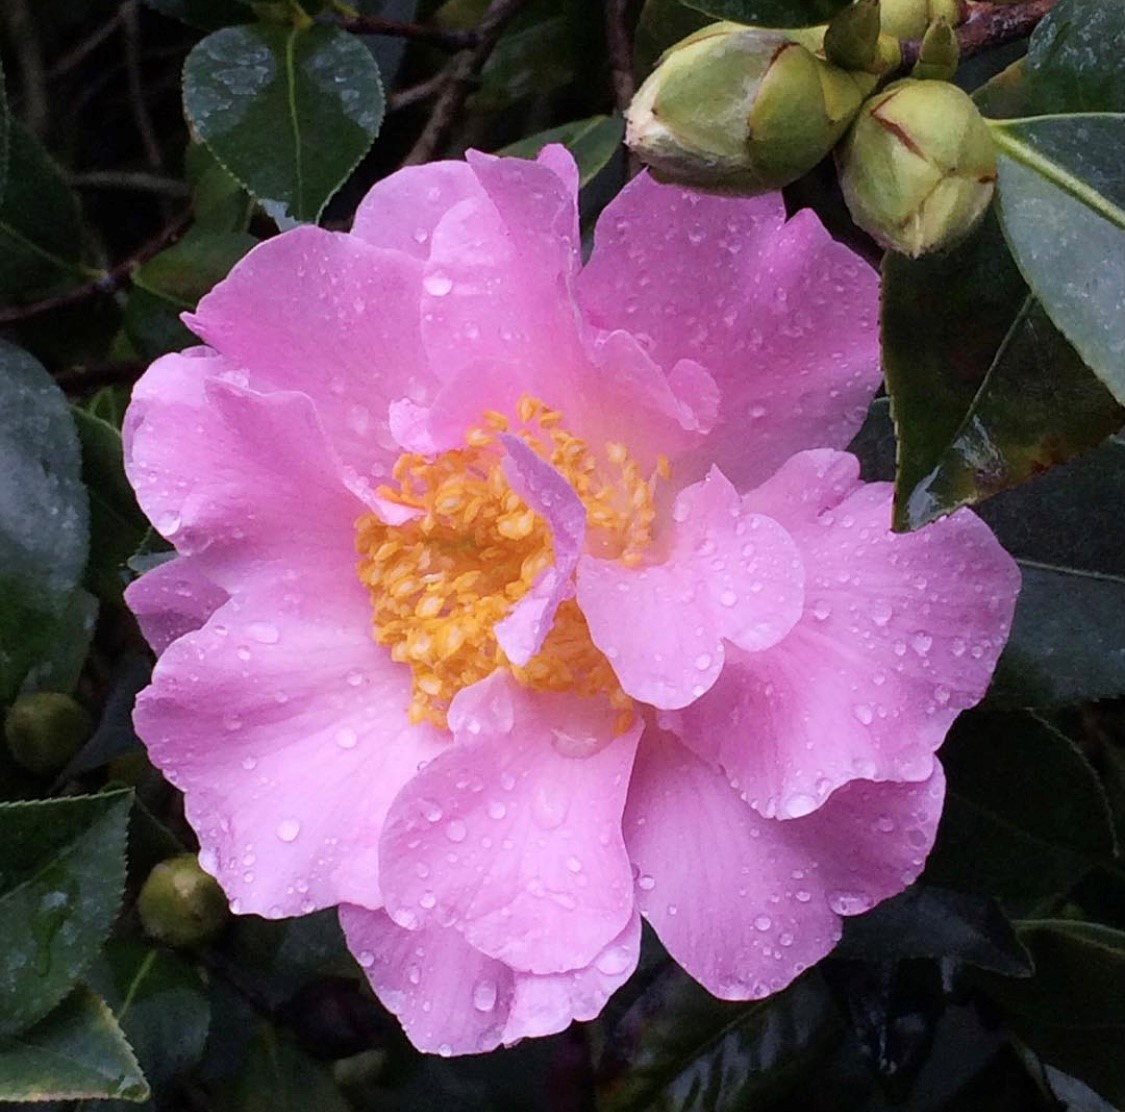 Pink Camellia flower with a yellow center.